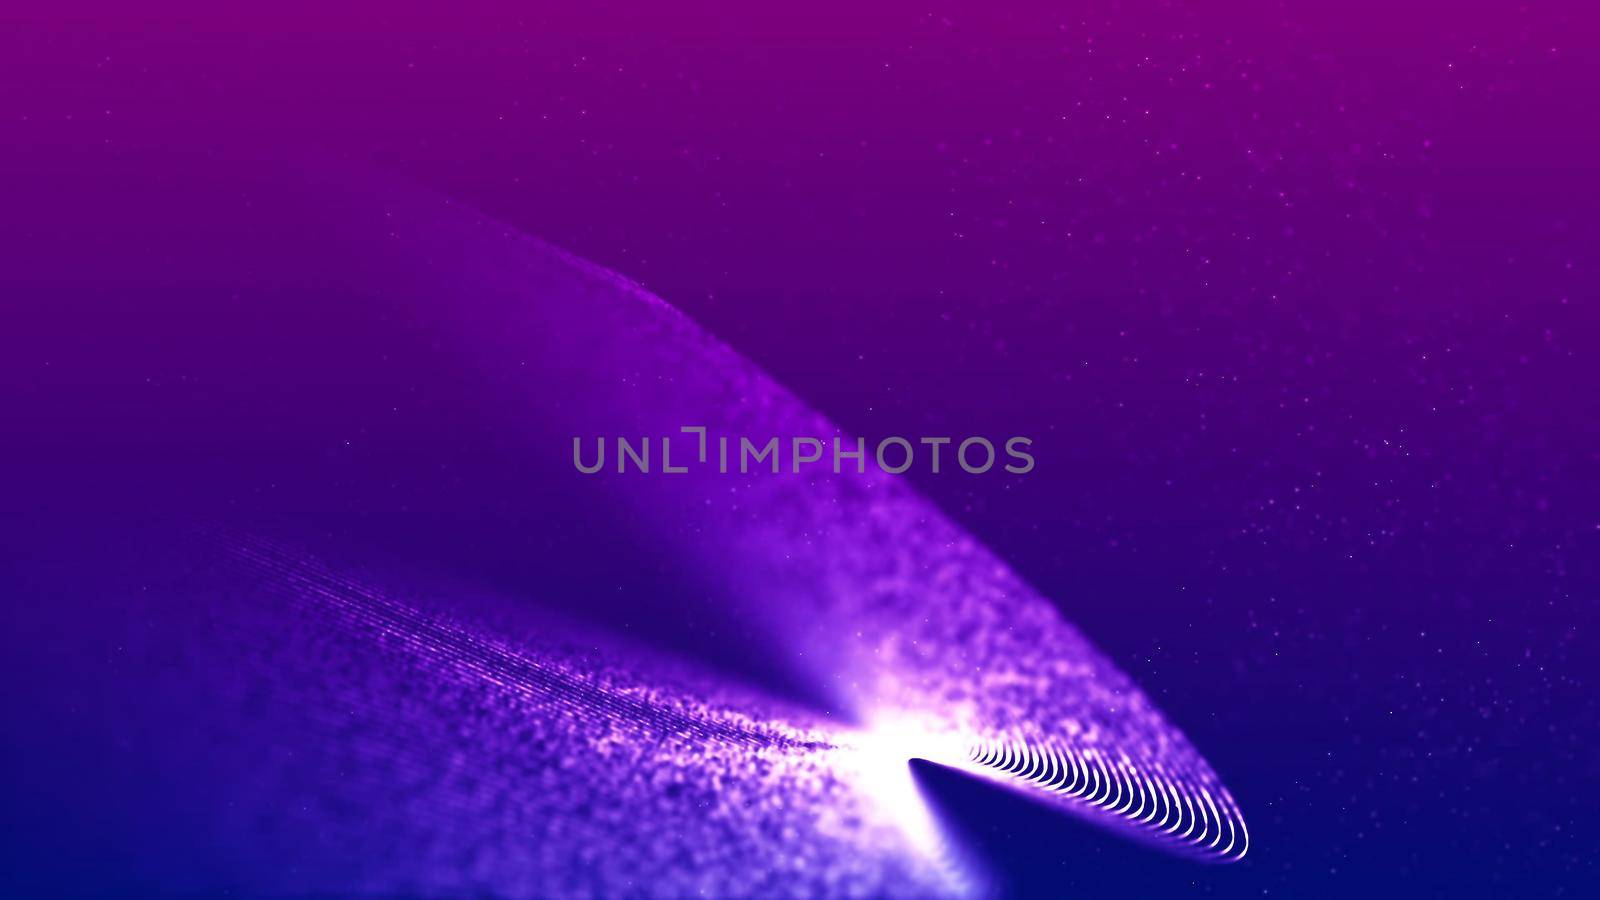 Background with nice abstract purple lines by designprojects